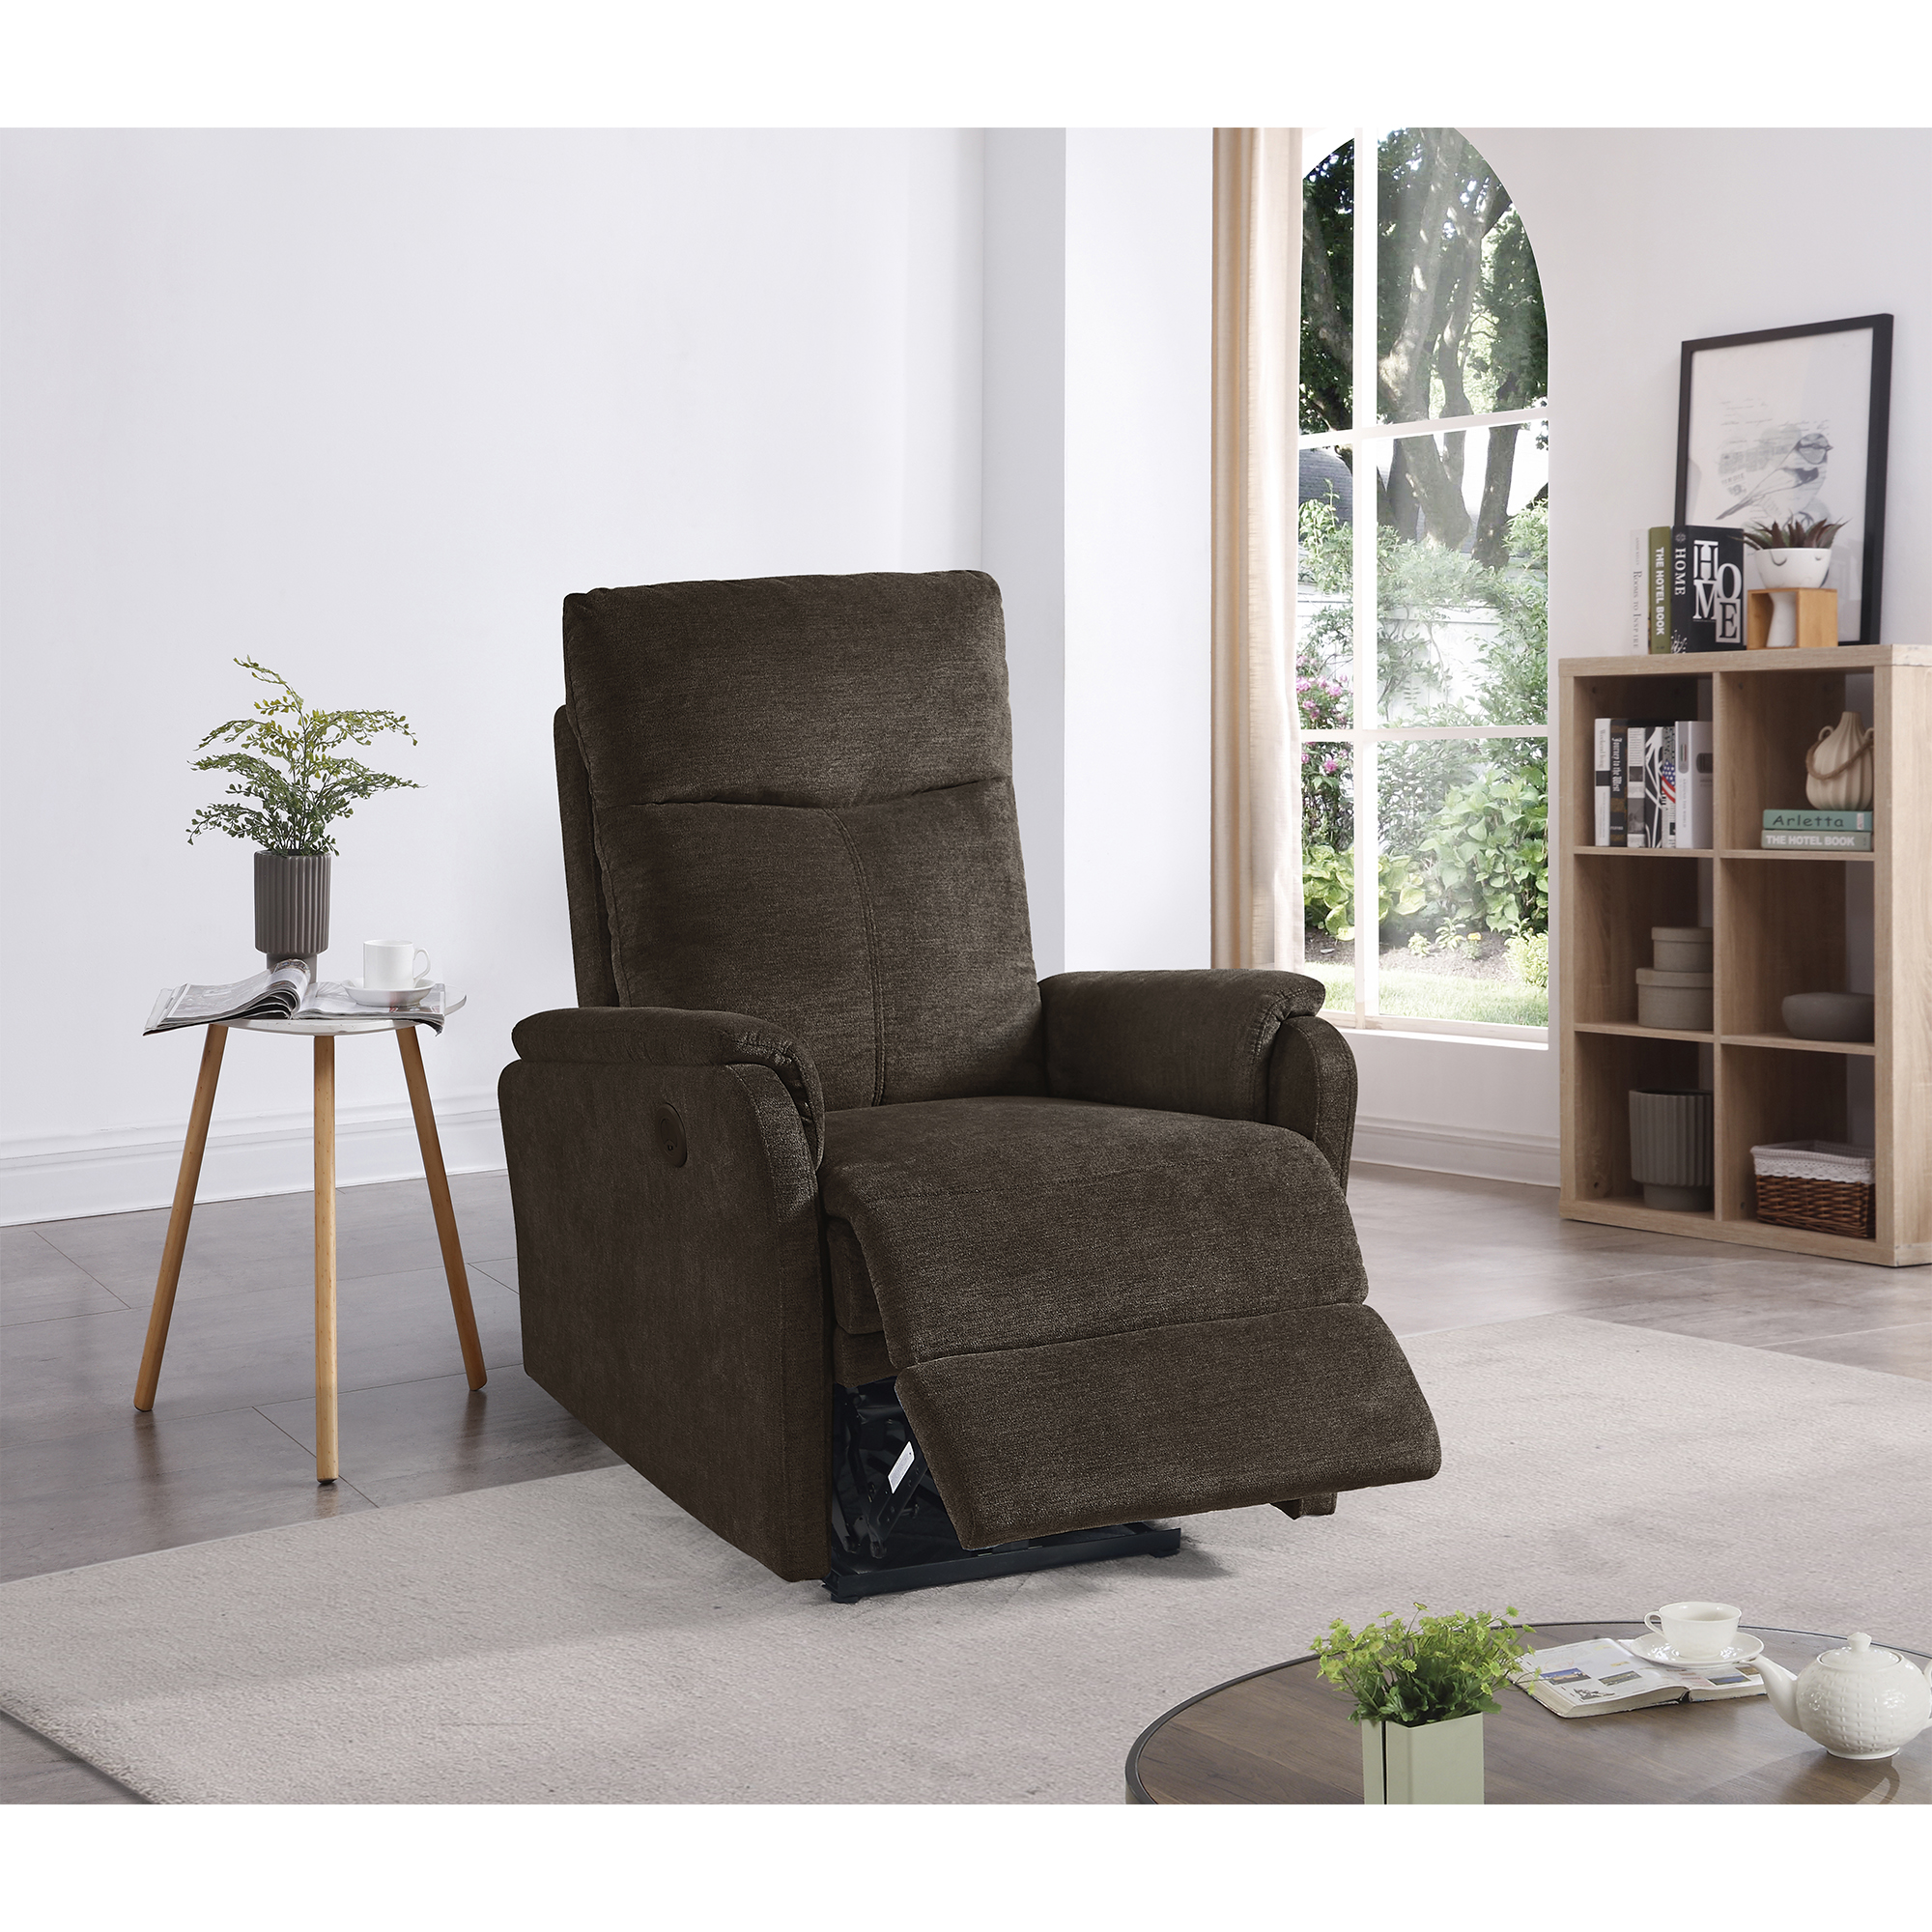 Hot selling For 10 Years ,Recliner Chair With Power function easy control big stocks ,  Recliner Single Chair For Living Room , Bed Room-Boyel Living